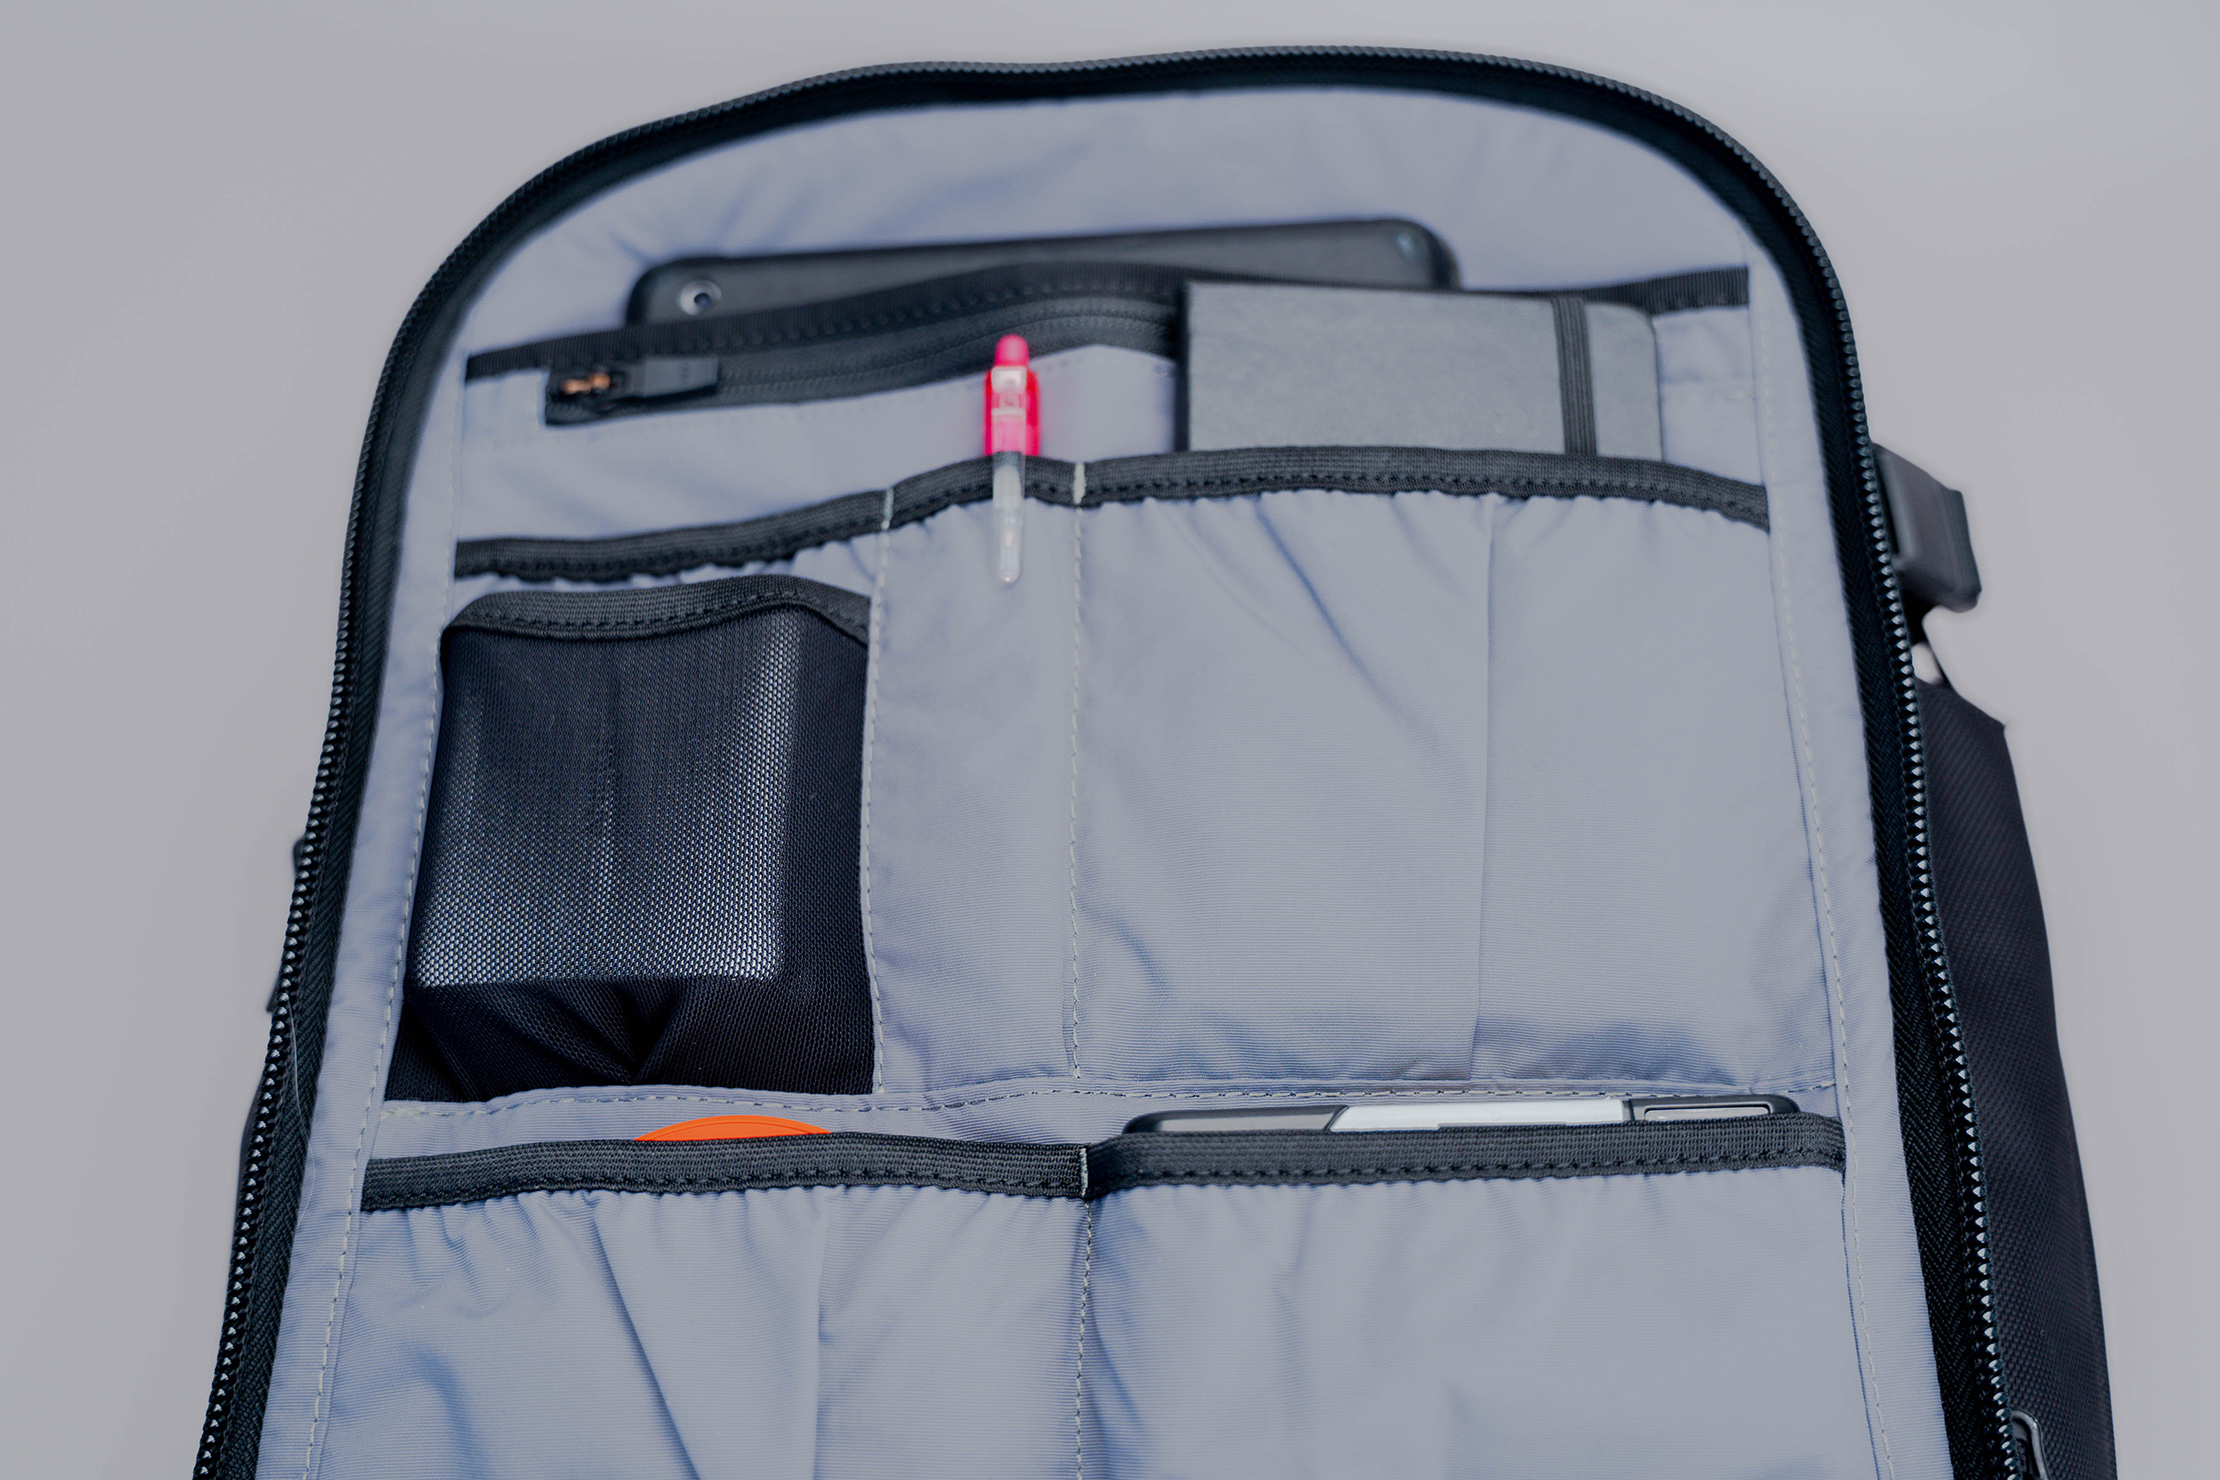 Aer Travel Pack 3 Small 1 Compartment